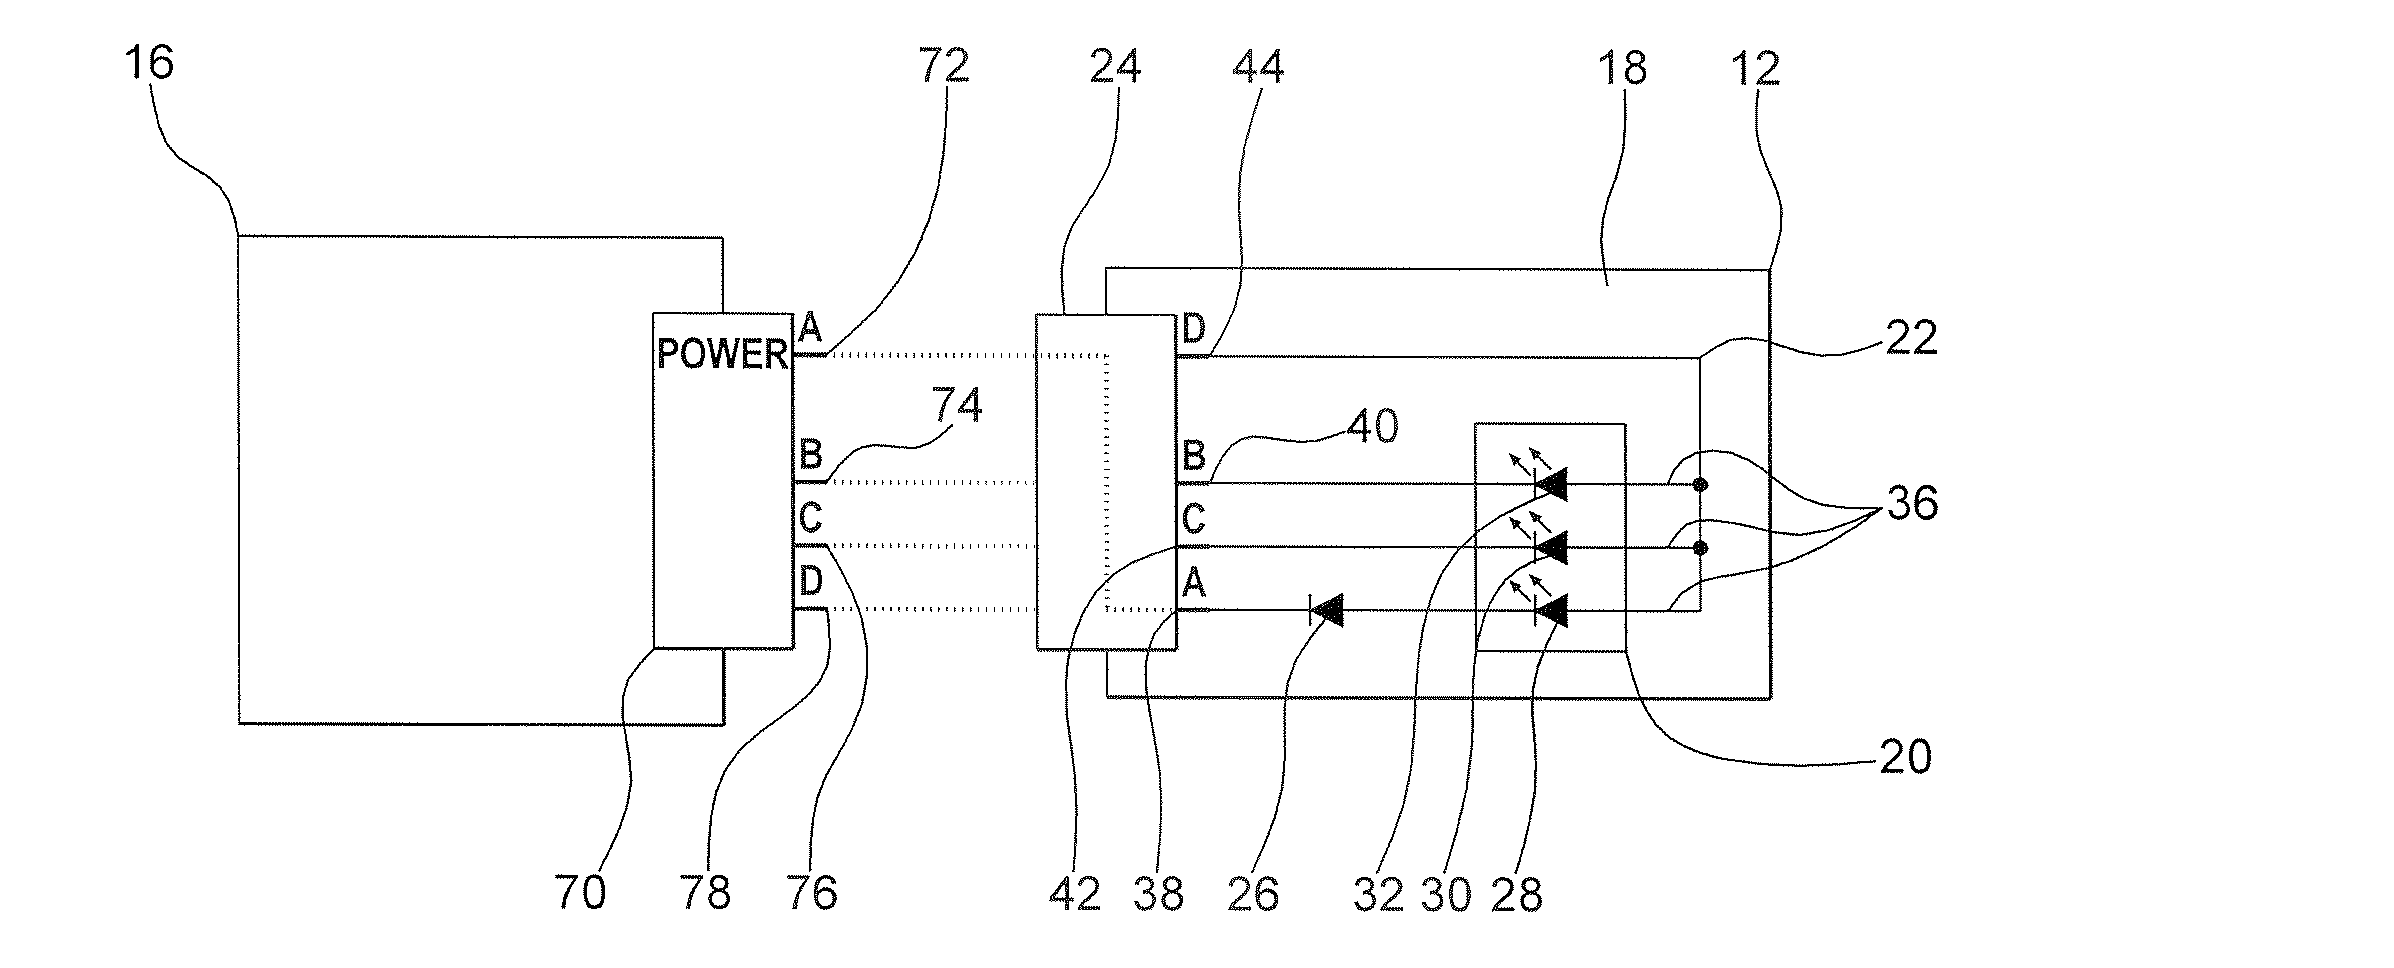 Non-mechanical means for connector polarization for a lighting system